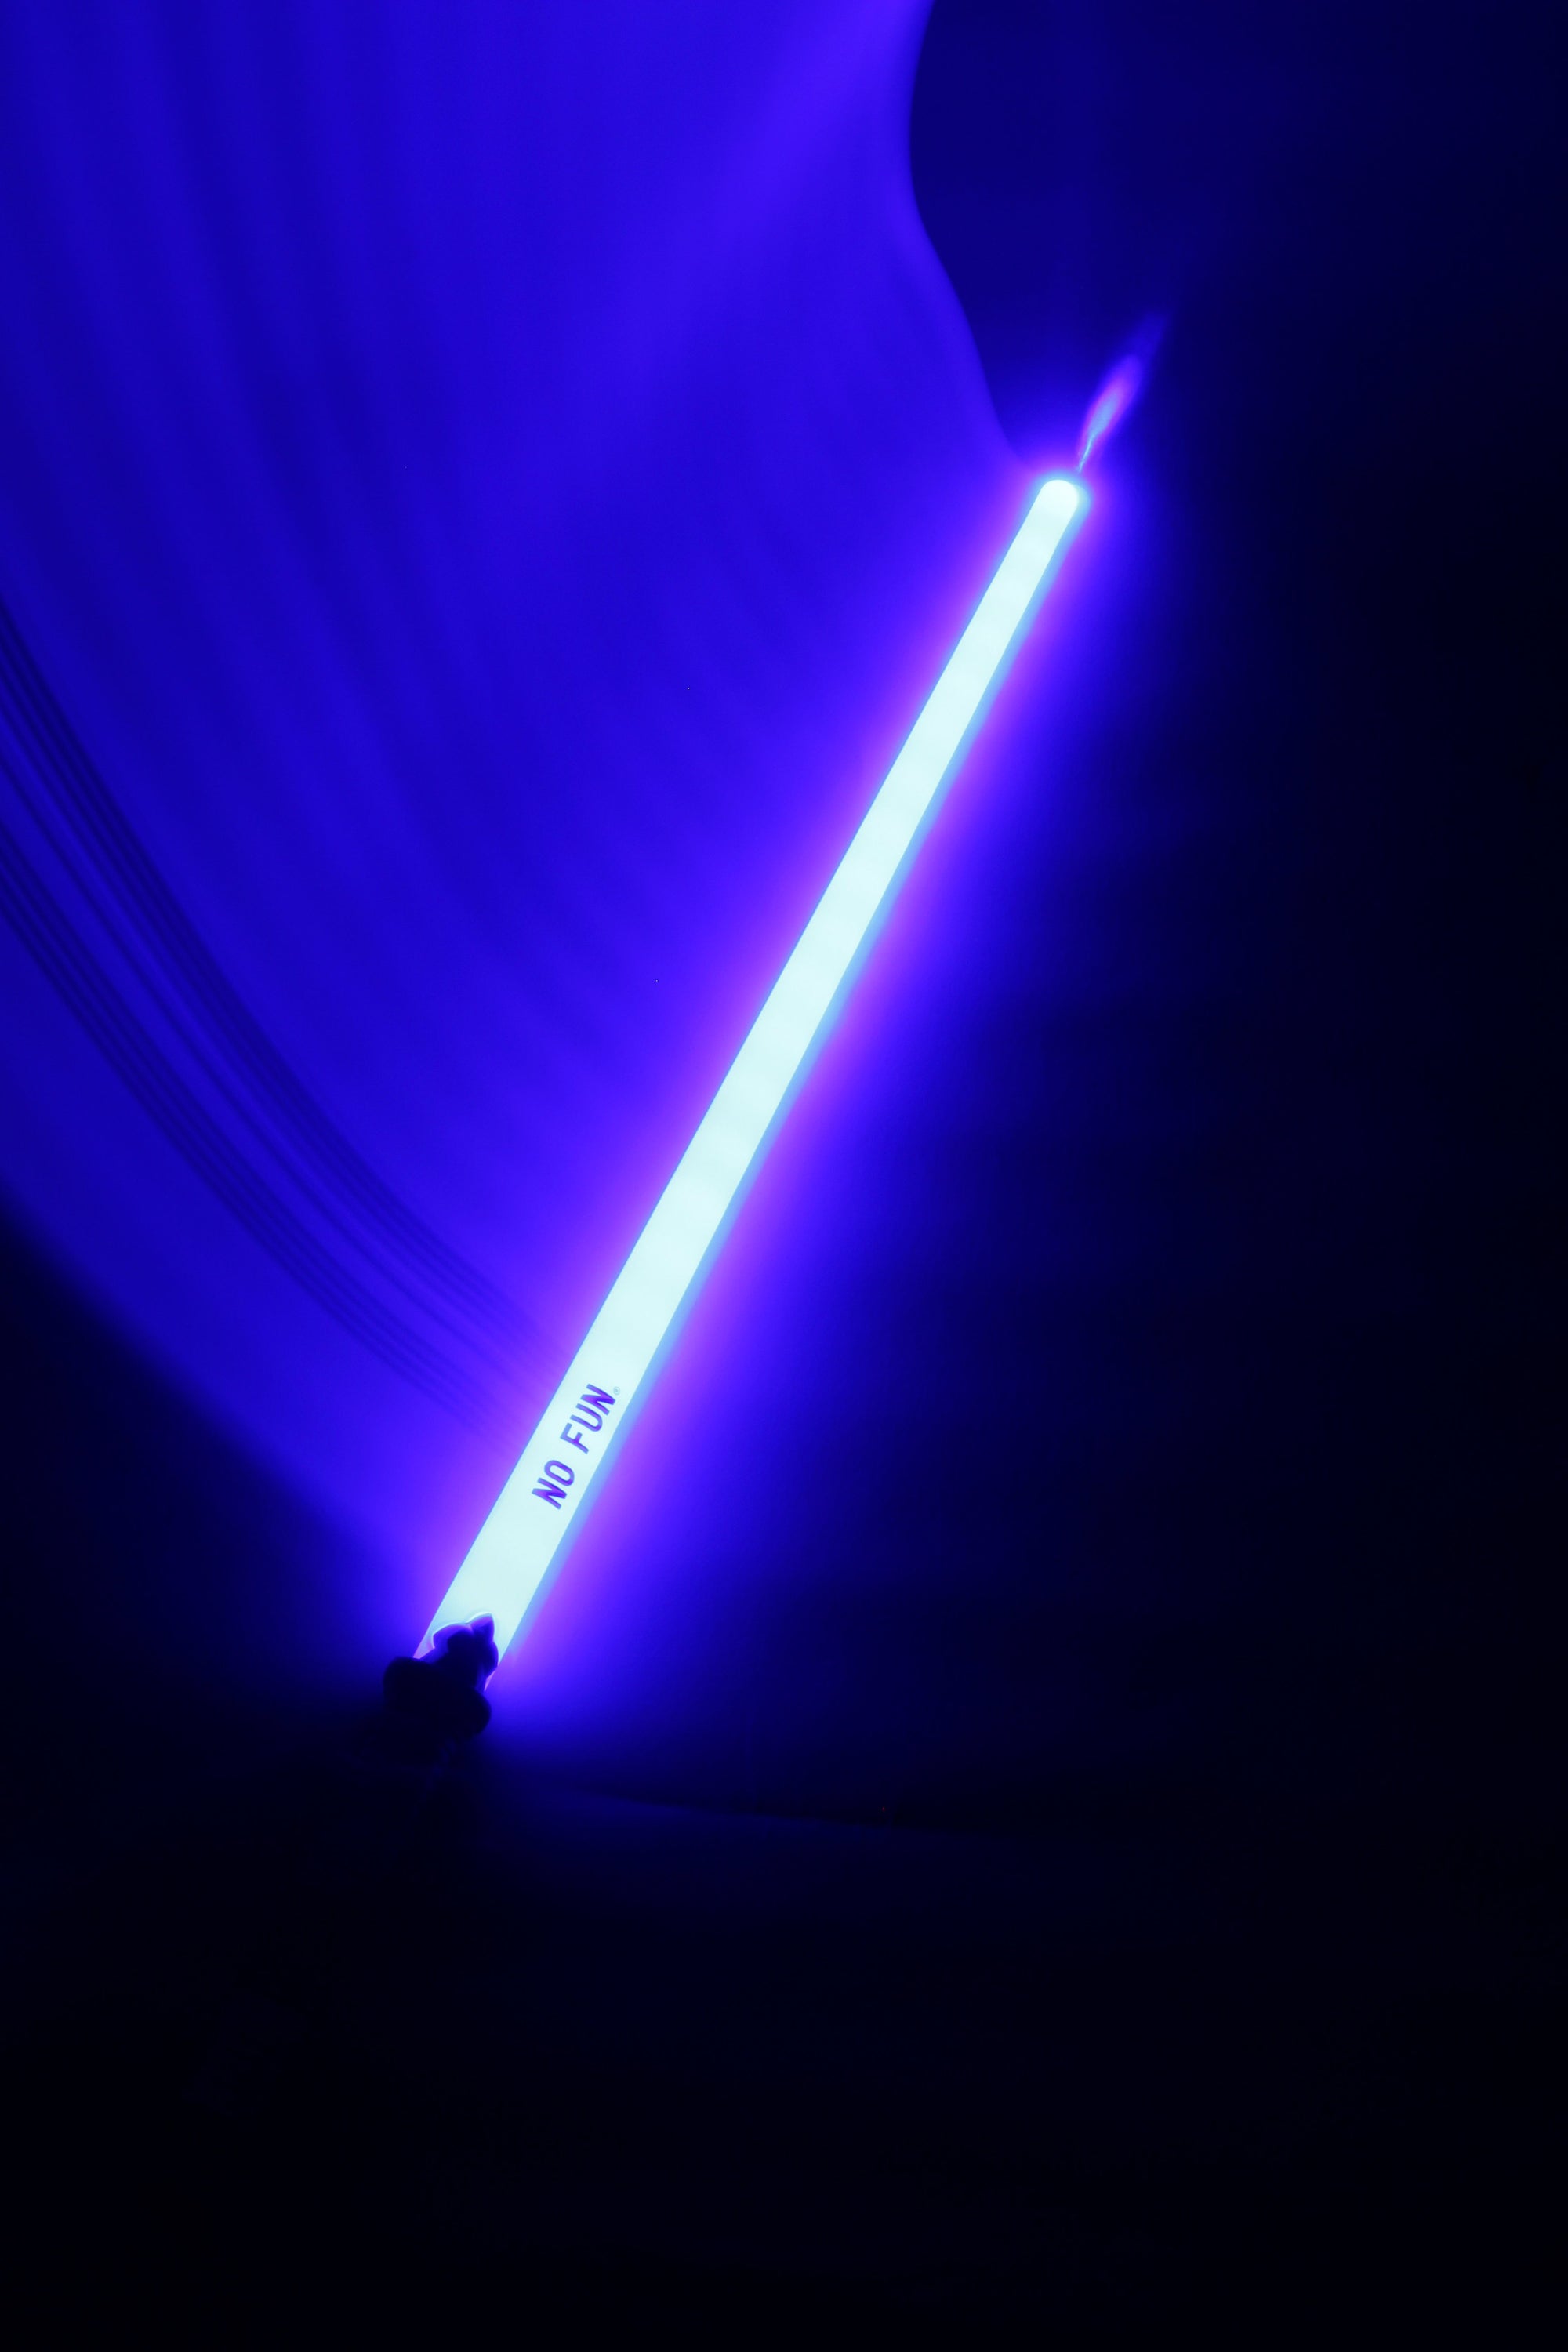 A photo of a blue novelty sword illuminating a dark background.  There is a light trail flowing from the sword to the top left hand corner of the image, showcasing the colour.  The "NO FUN®" logo near the handle is visible to the camera.